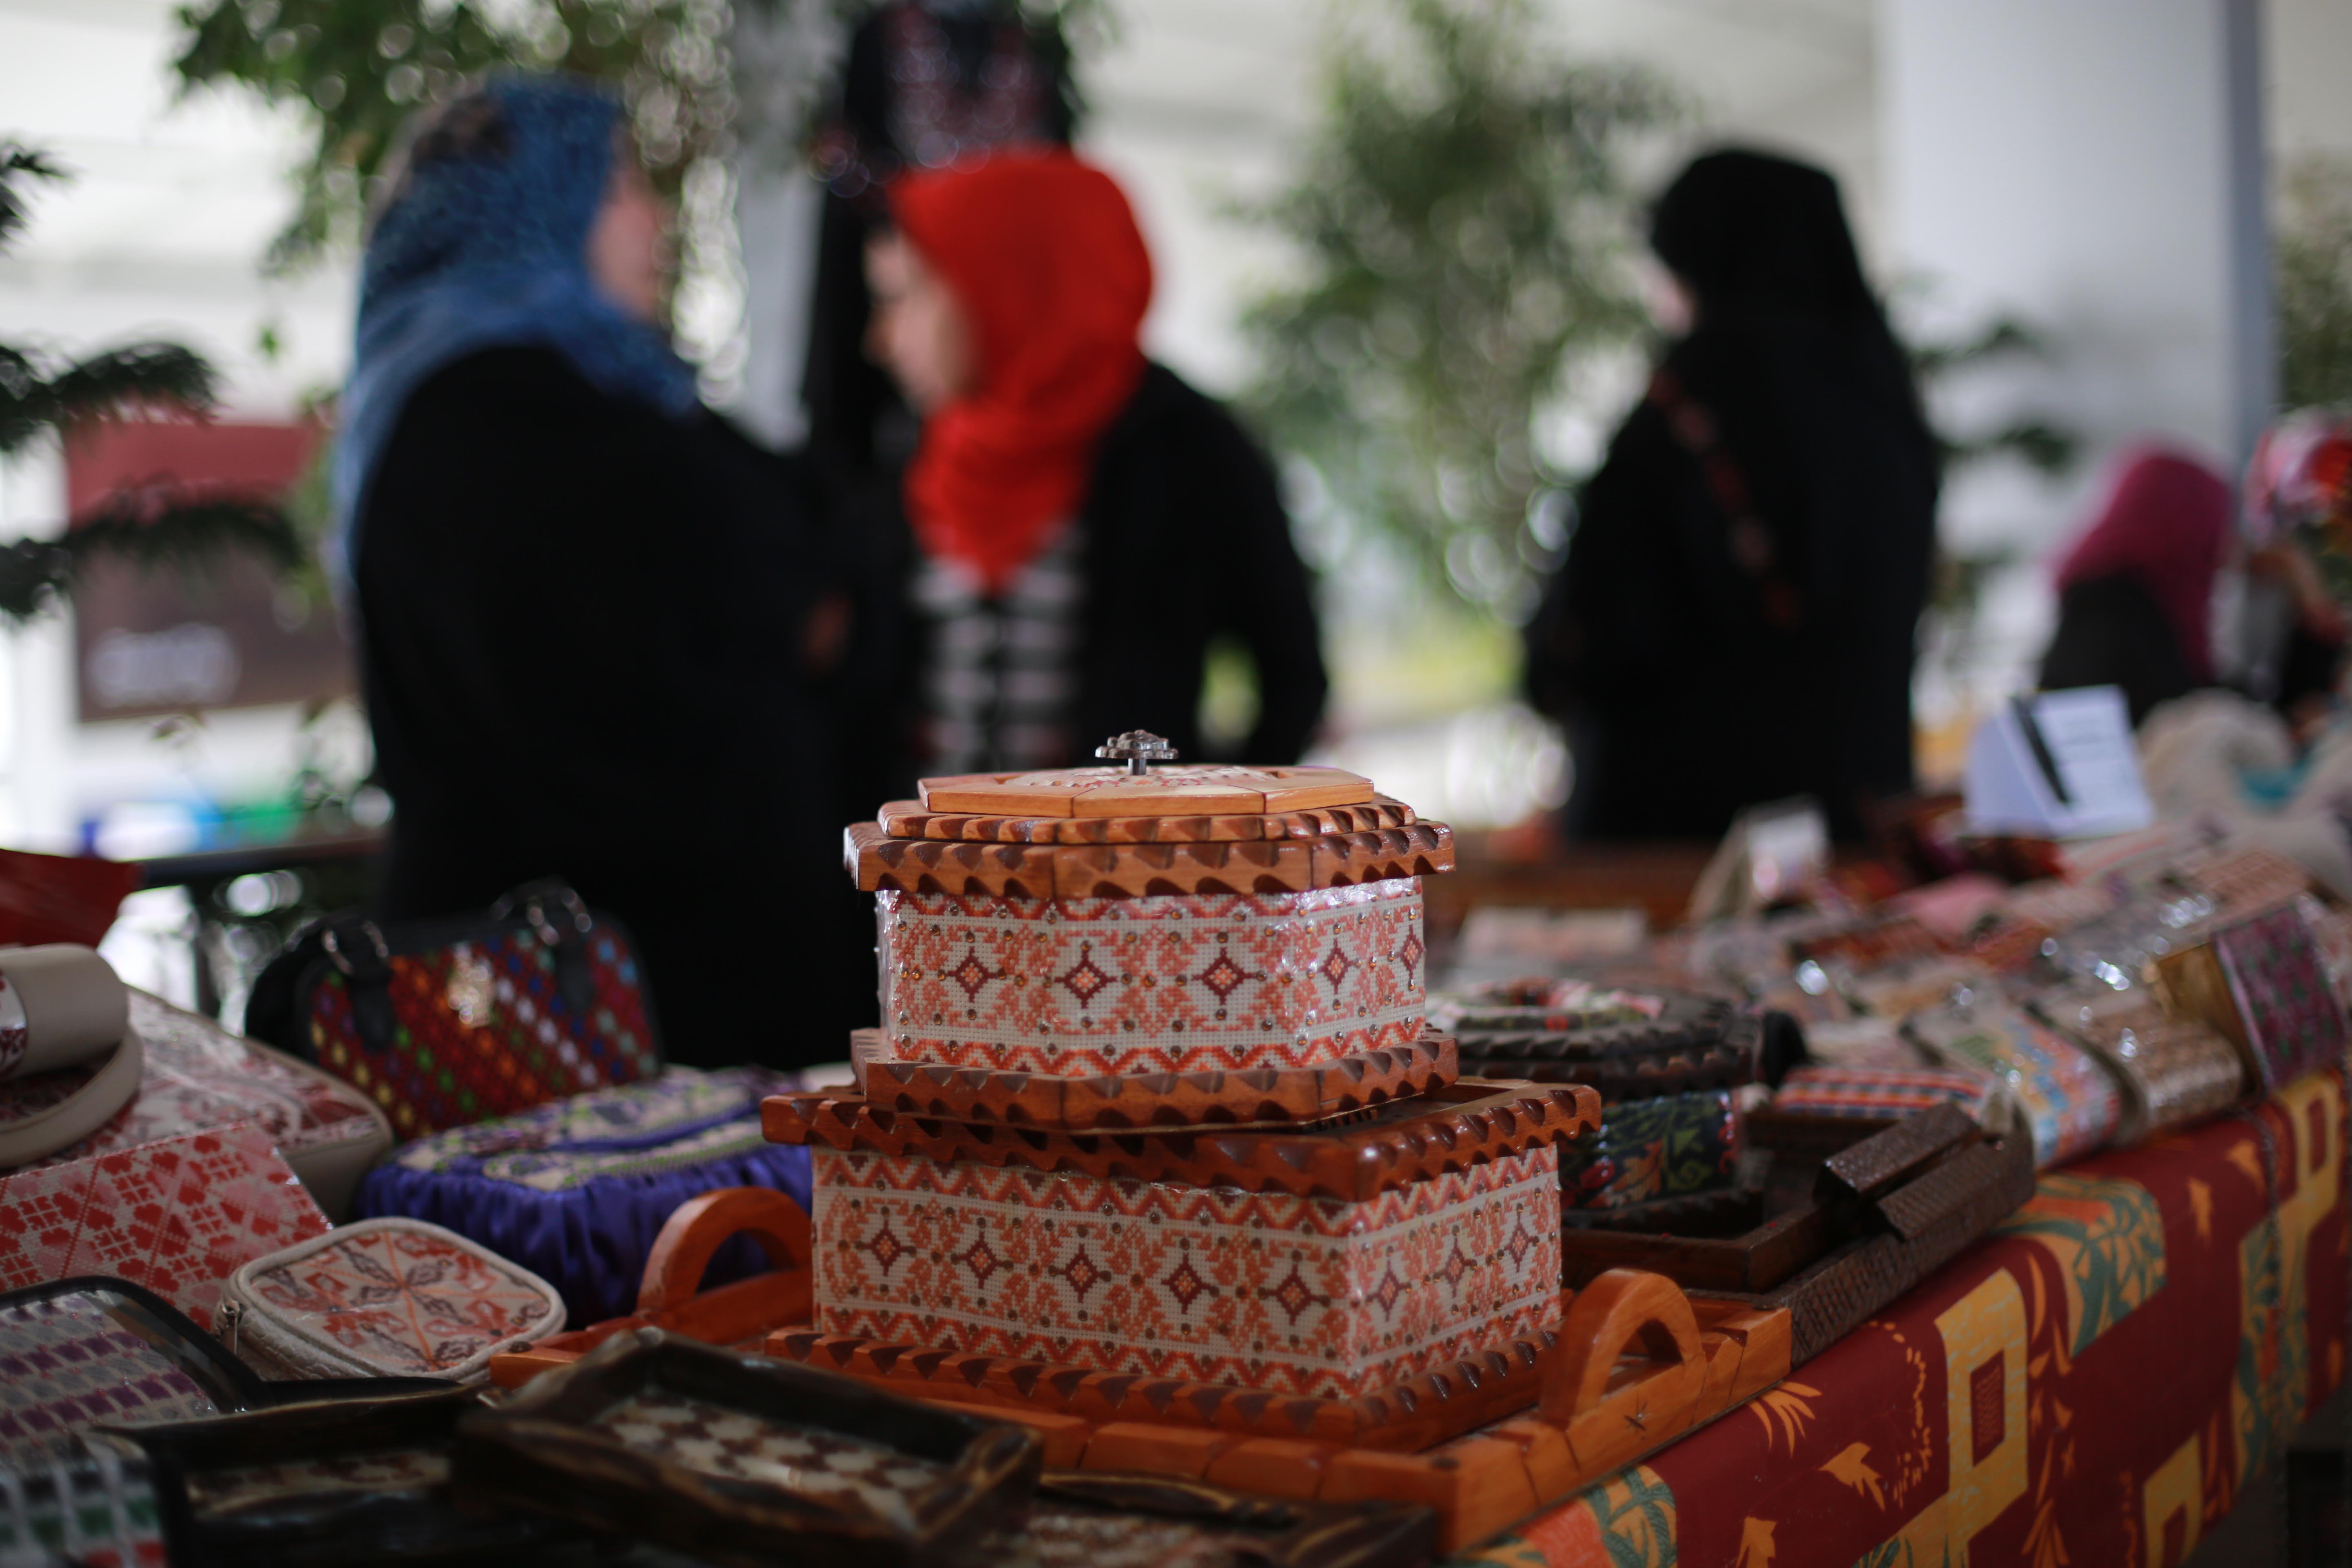 Palestinian women display handcrafts at heritage exhibit in the Gaza Strip. Photo courtesy of Mohammed Asad. All RightS Reserved. Permission granted to republish with attribution to the author